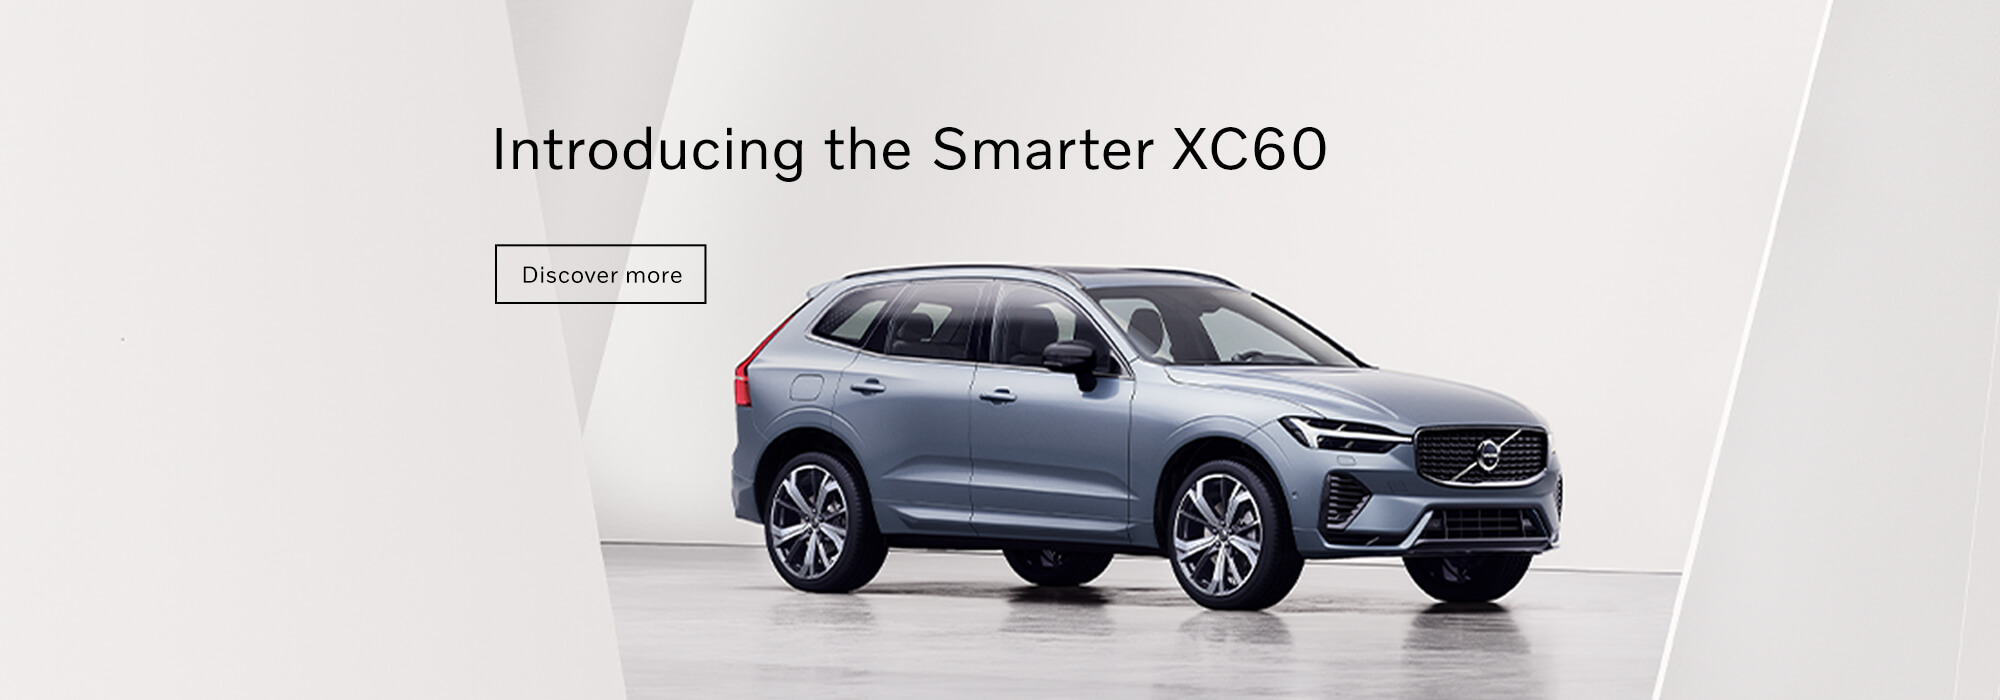 Introducing the Smarter Volvo XC60